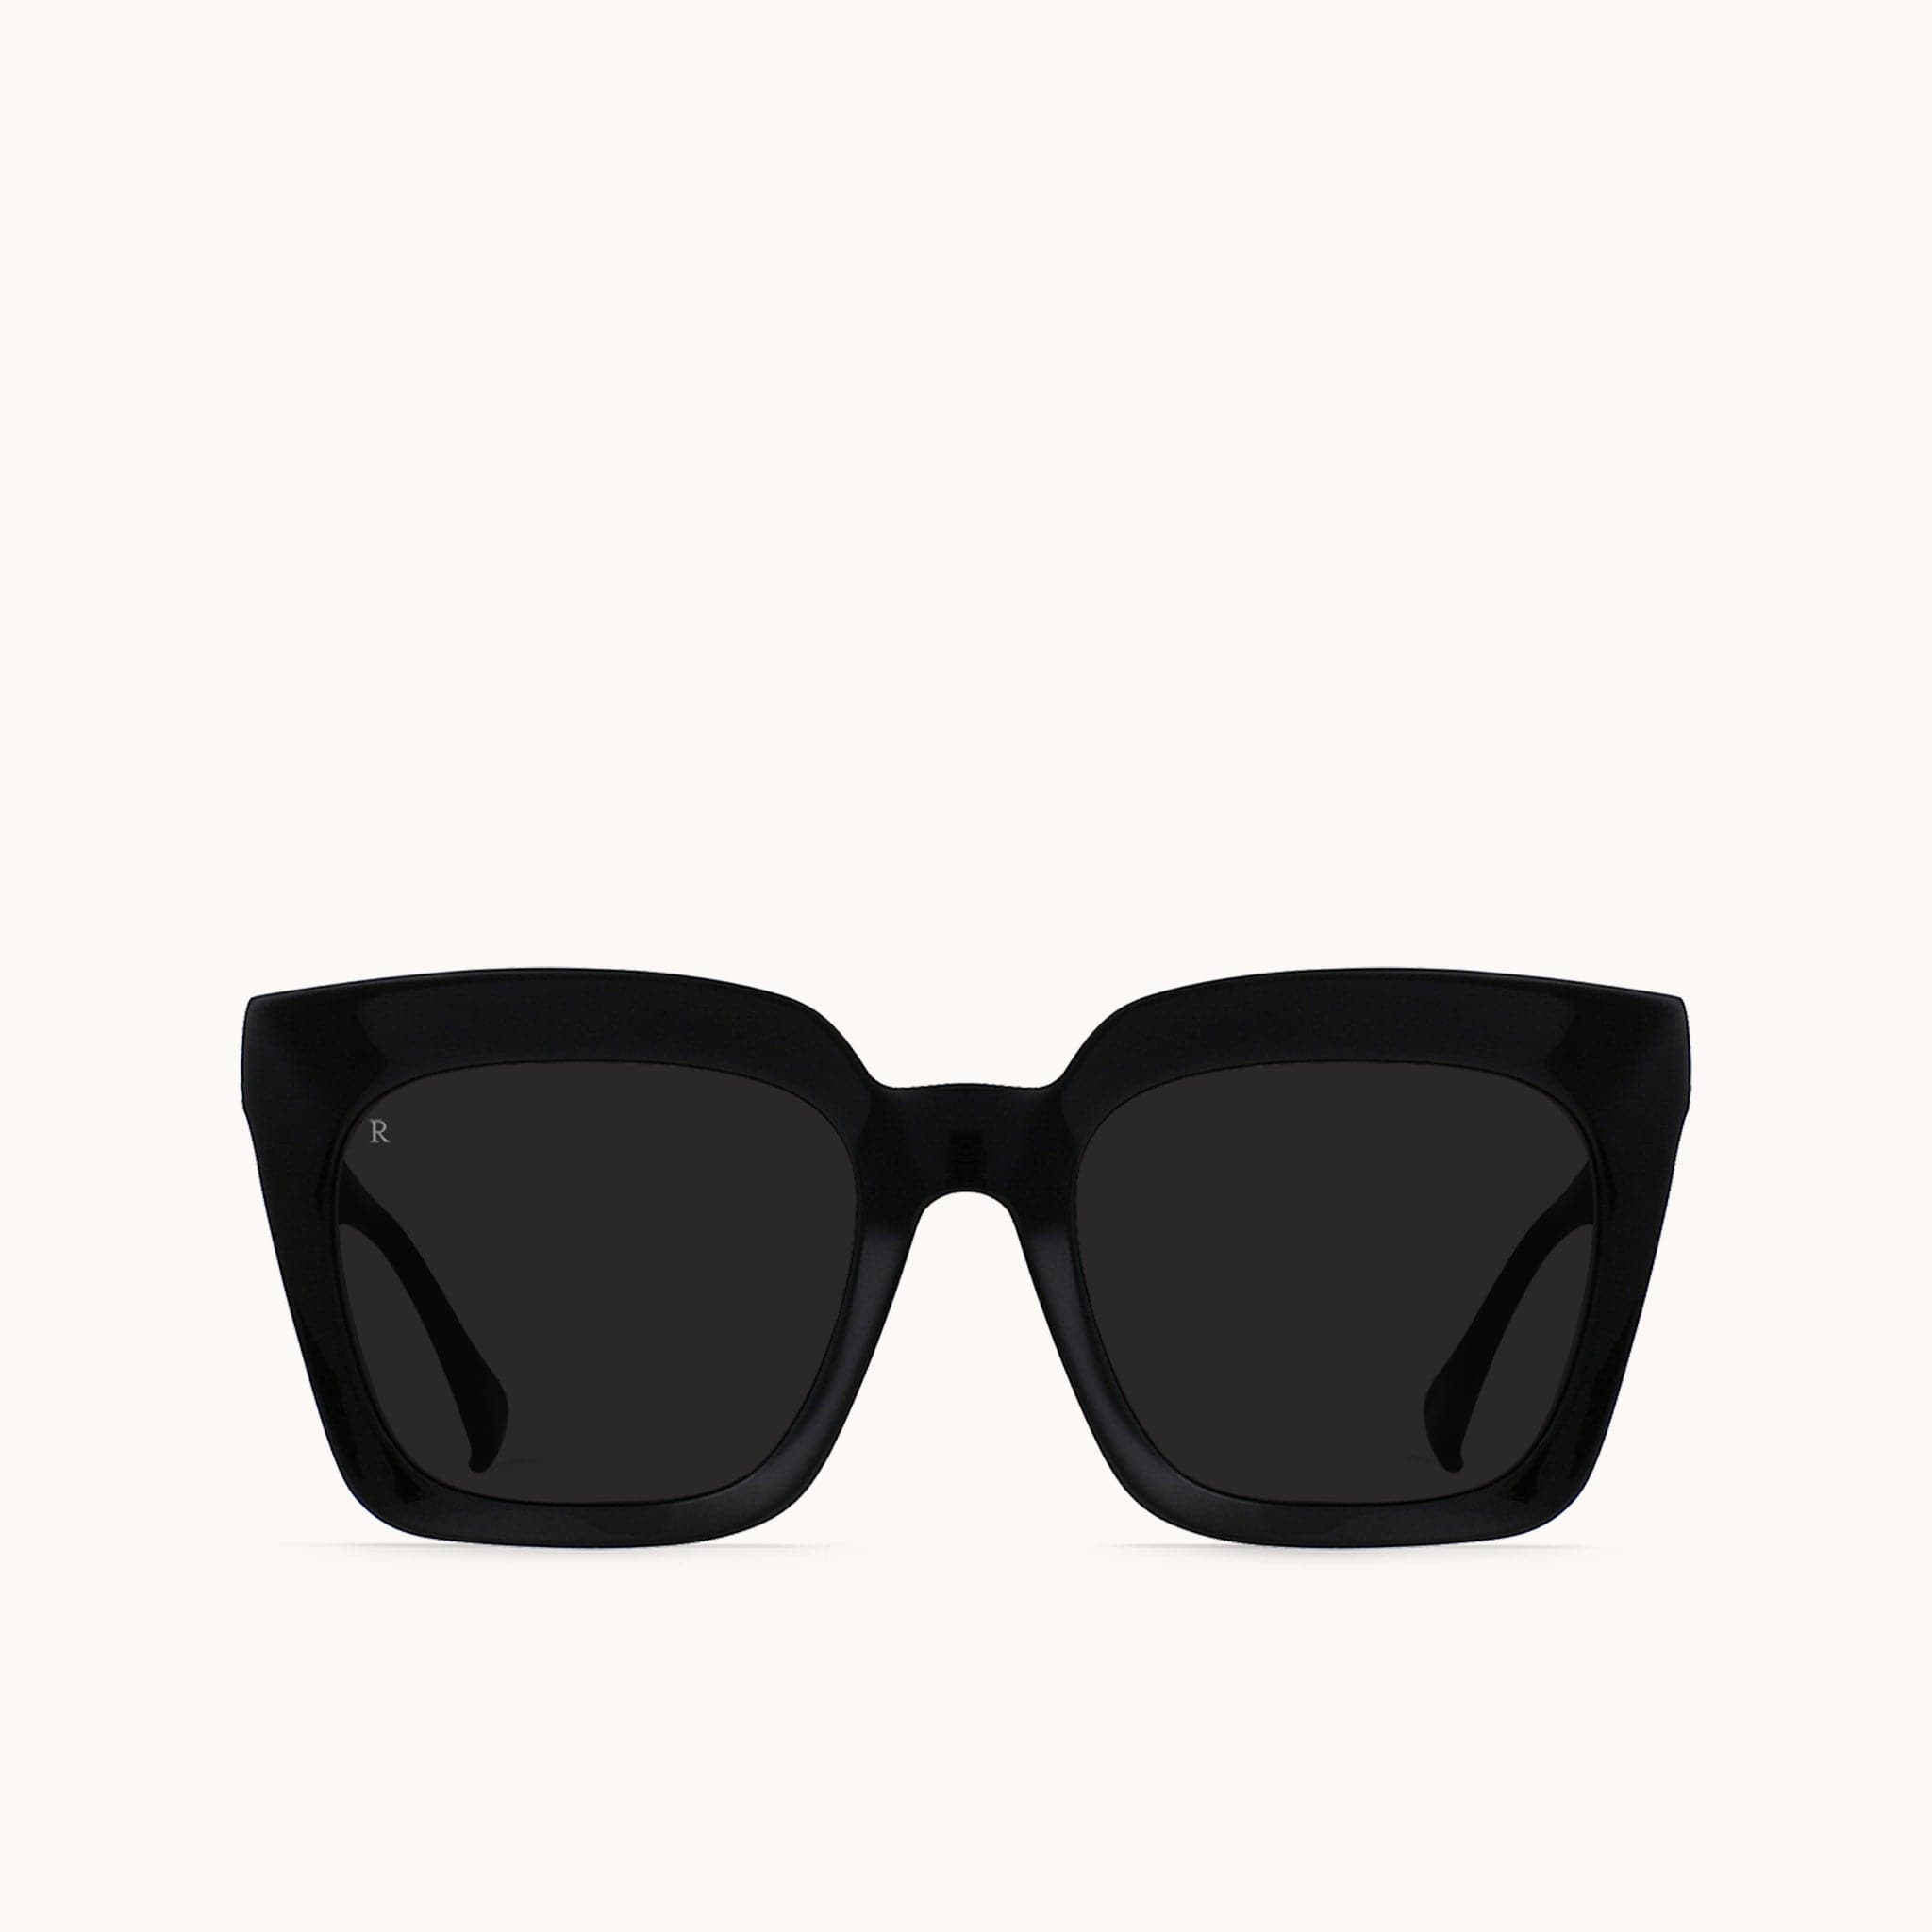 Sedona framed sunglasses with glossy black arms and frames made of high quality acetate. These glasses have a distinct, oversized look from their thick frames and round, squared and dark lenses.